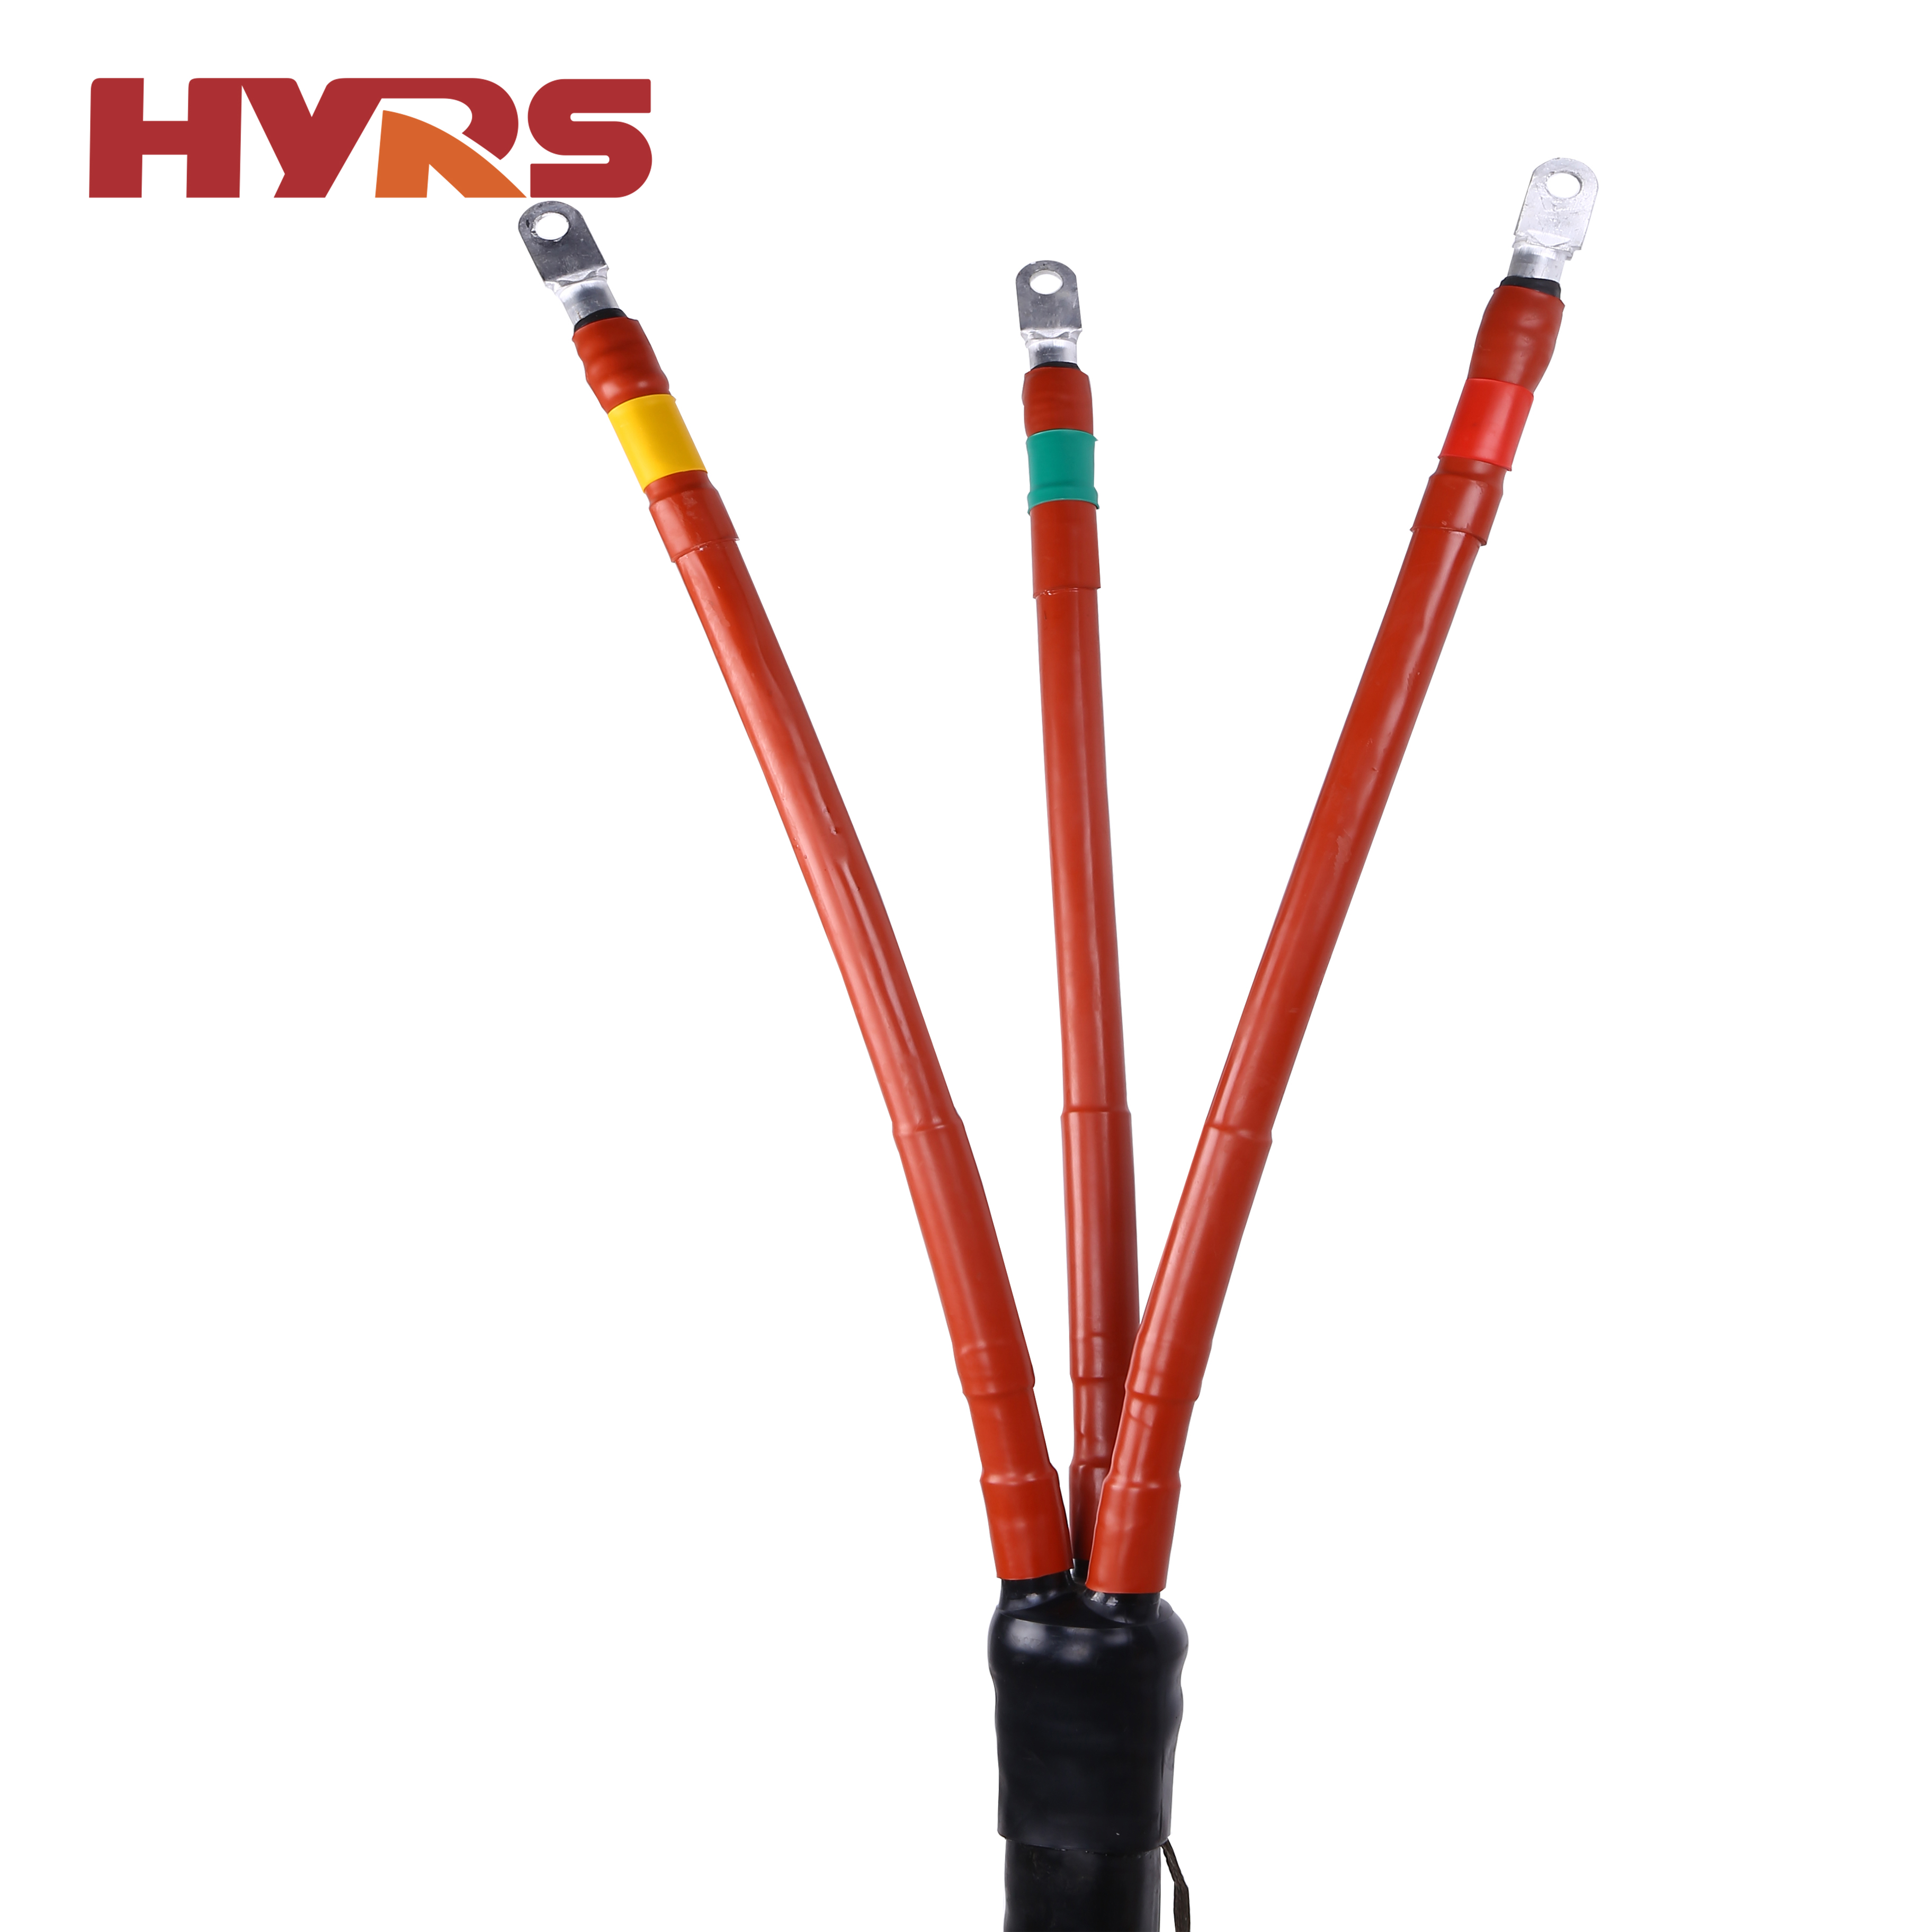 The advantages and disadvantages of customized cable accessories